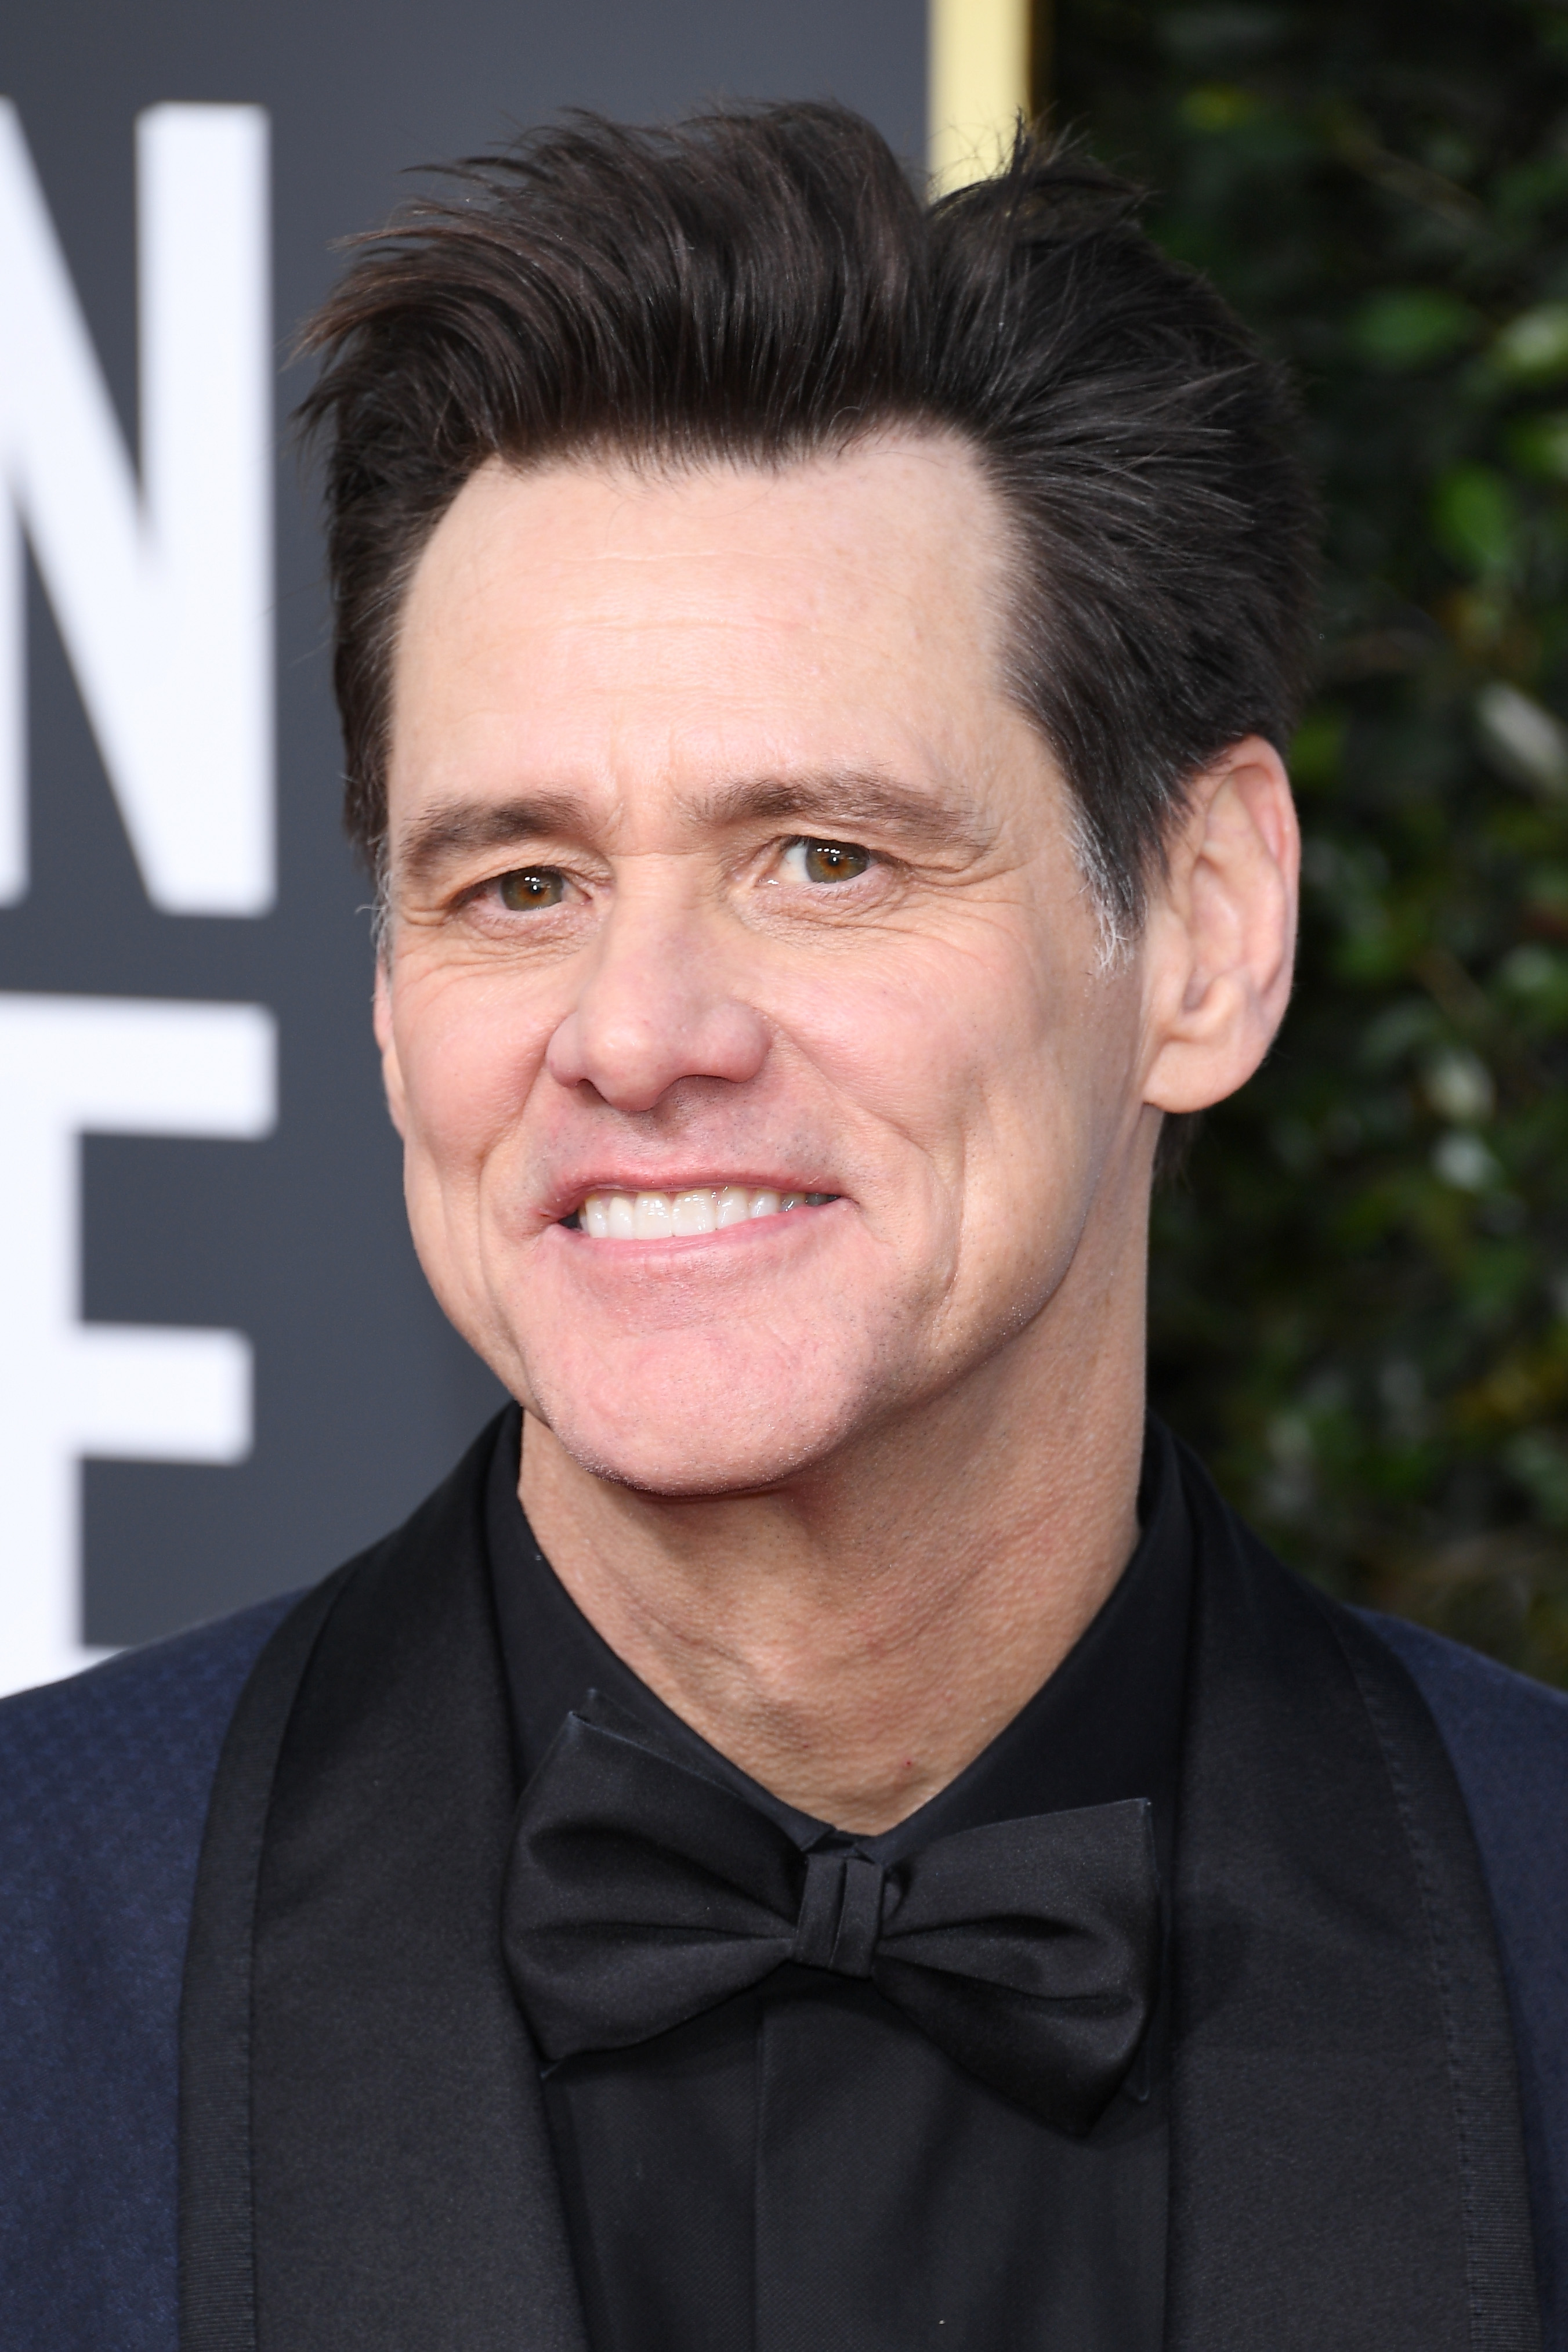 Jim Carrey at the 76th Annual Golden Globe Awards in Beverly Hills, California on January 6, 2019 | Source: Getty Images